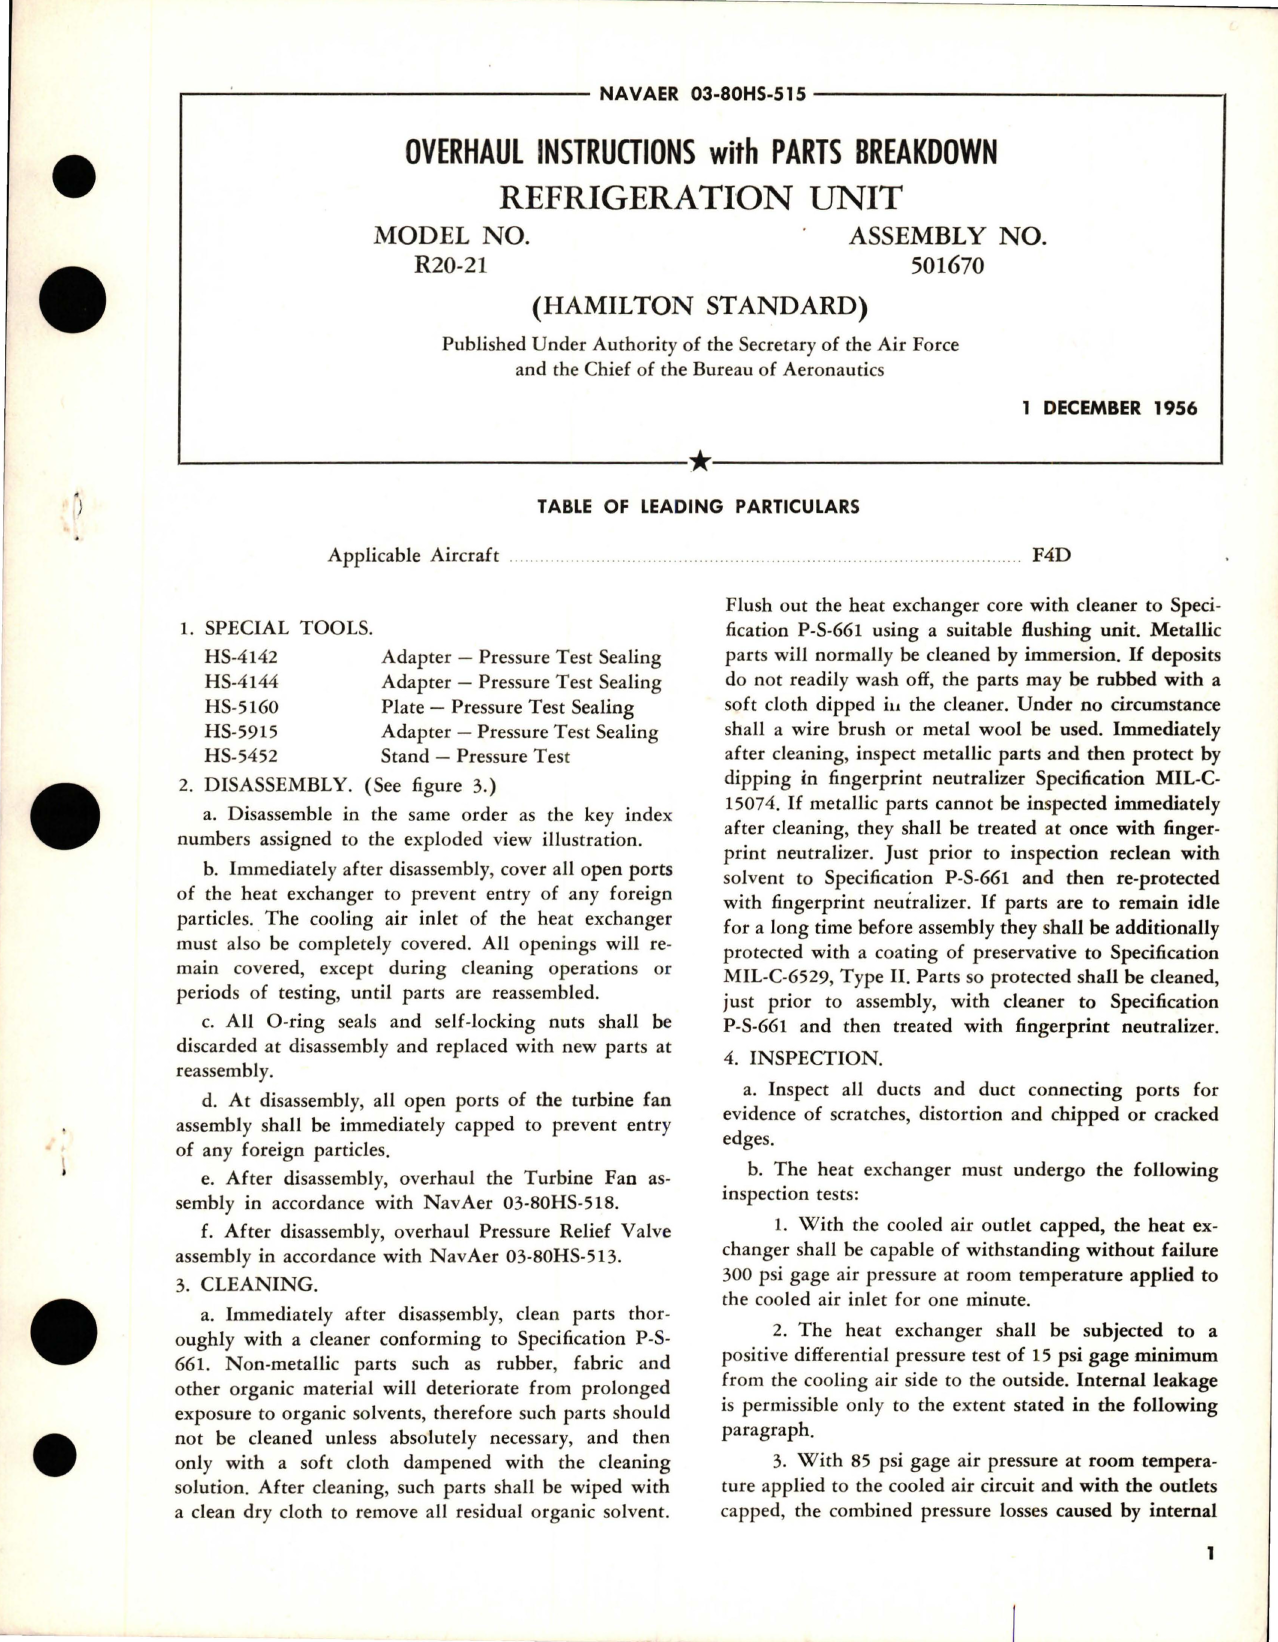 Sample page 1 from AirCorps Library document: Overhaul Instructions with Parts Breakdown for Refrigeration Unit - Model R20-21 - Assembly No 501670 